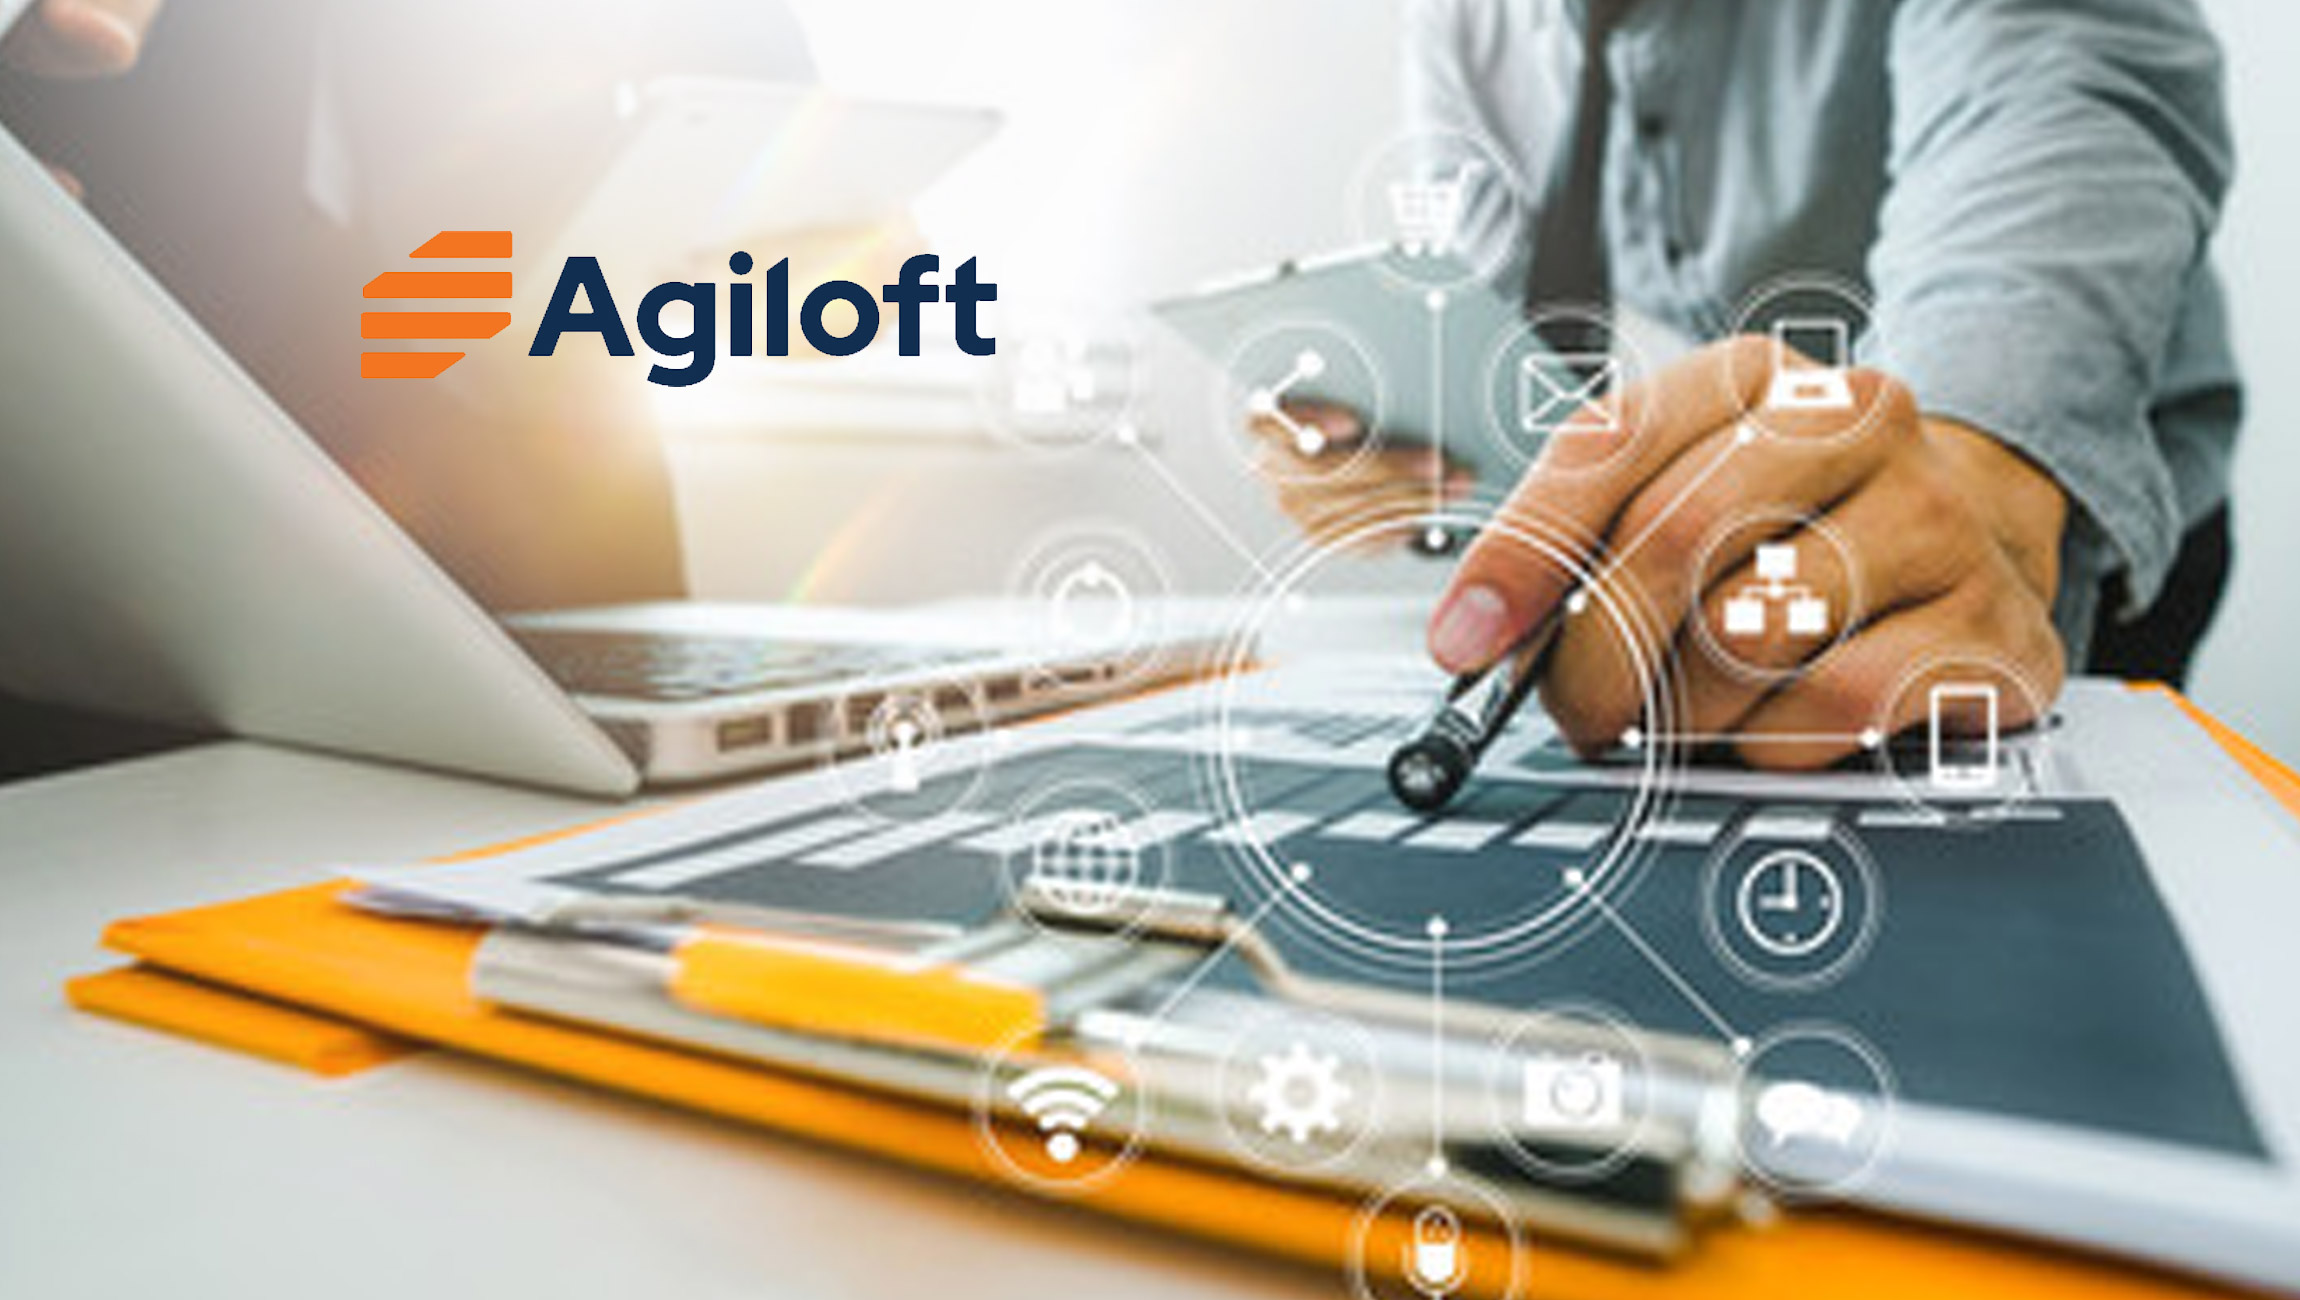 Agiloft Named a Leader in 2022 Gartner Magic Quadrant for Contract Life Cycle Management for Third Year in a Row